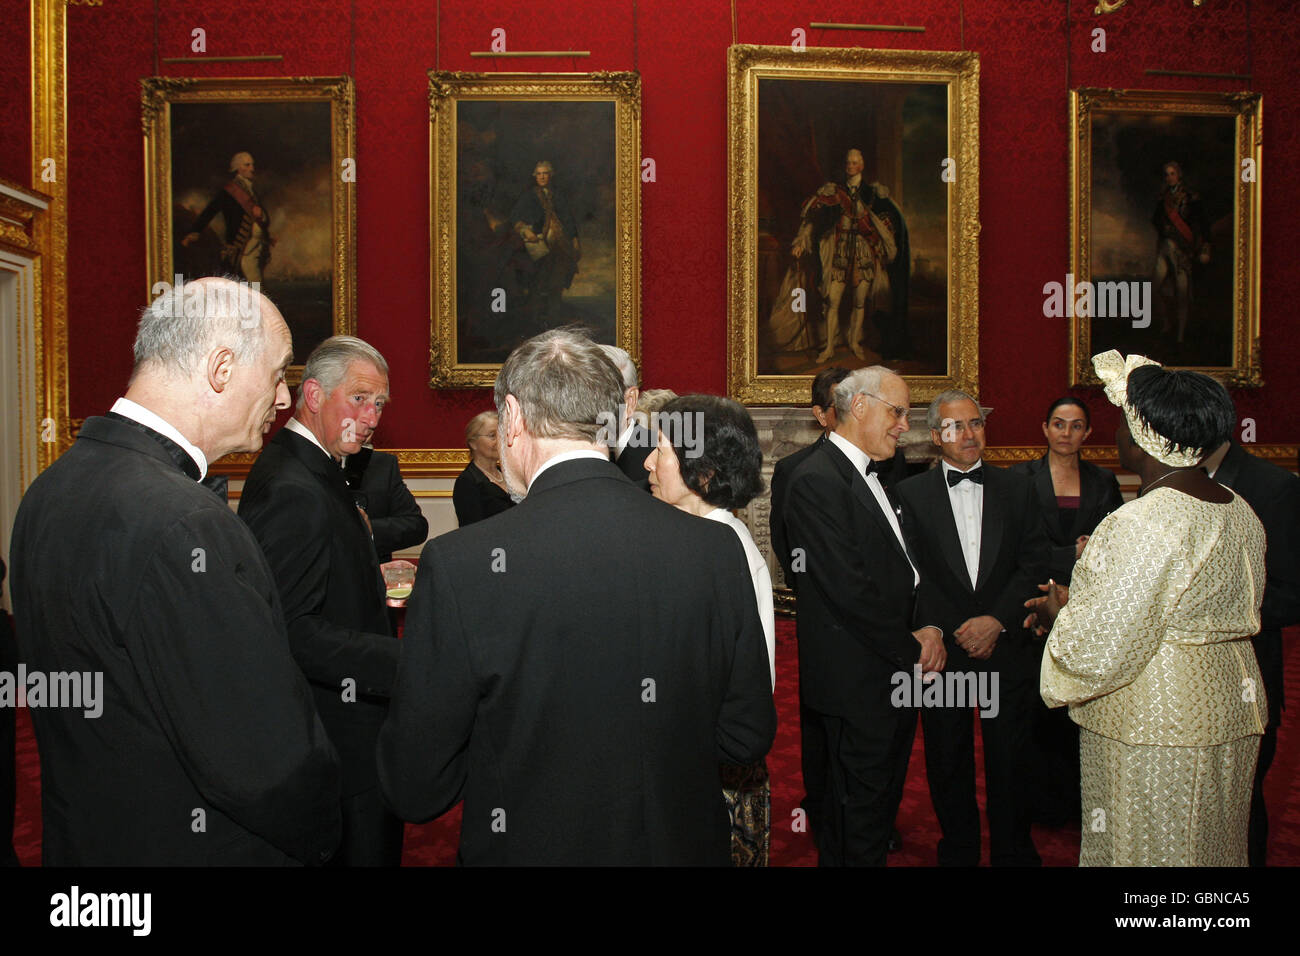 Britain's Prince Charles, the Prince of Wales (2nd left) talks to unidentified guests, during a reception for Nobel Laureates and climate change experts, at St James's Palace in London, Stock Photo